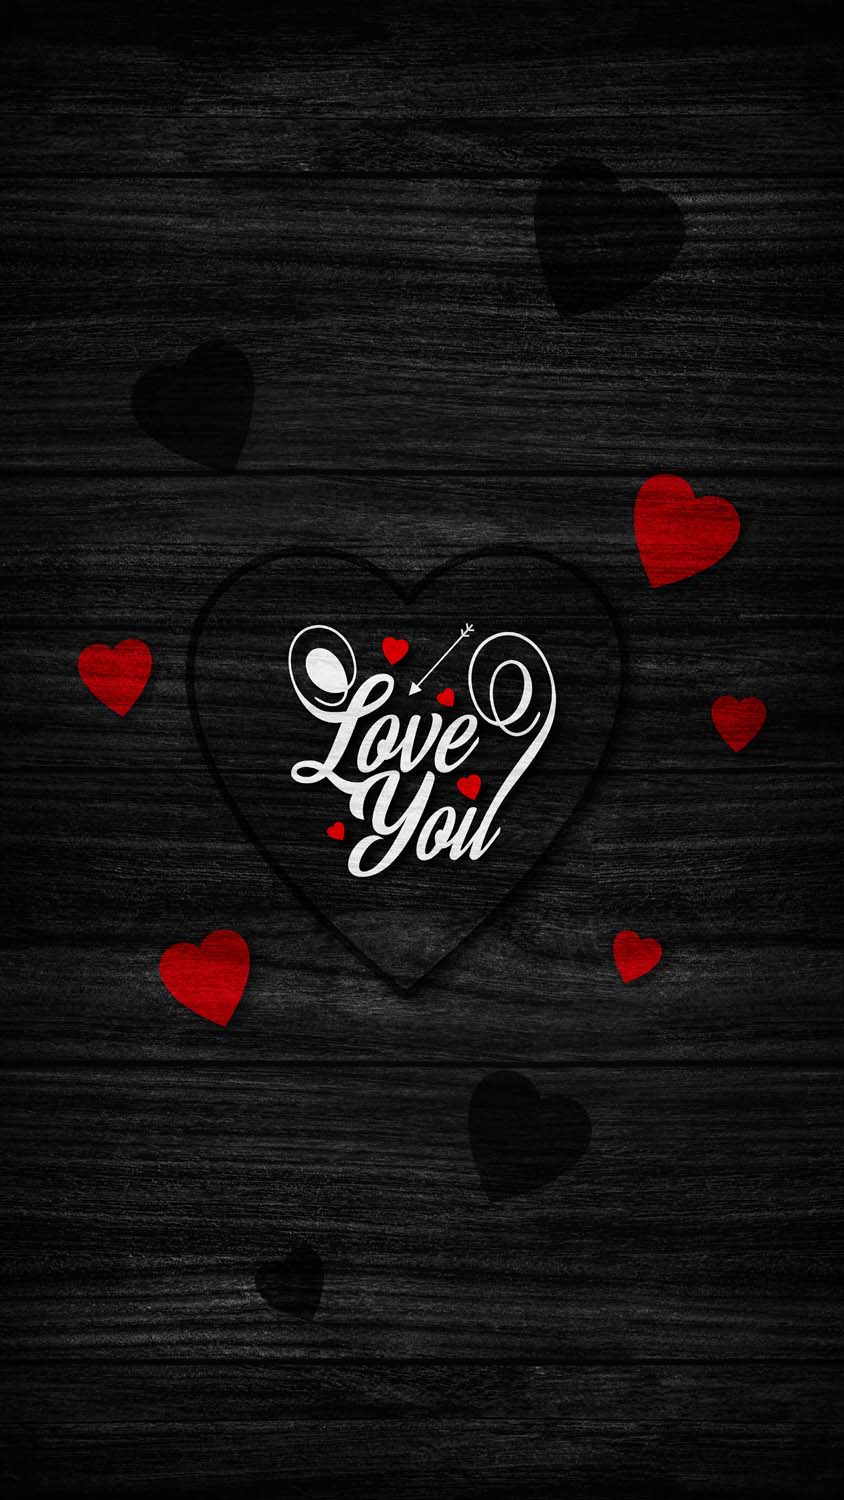 Love You IPhone Wallpaper HD - IPhone Wallpapers : iPhone Wallpapers